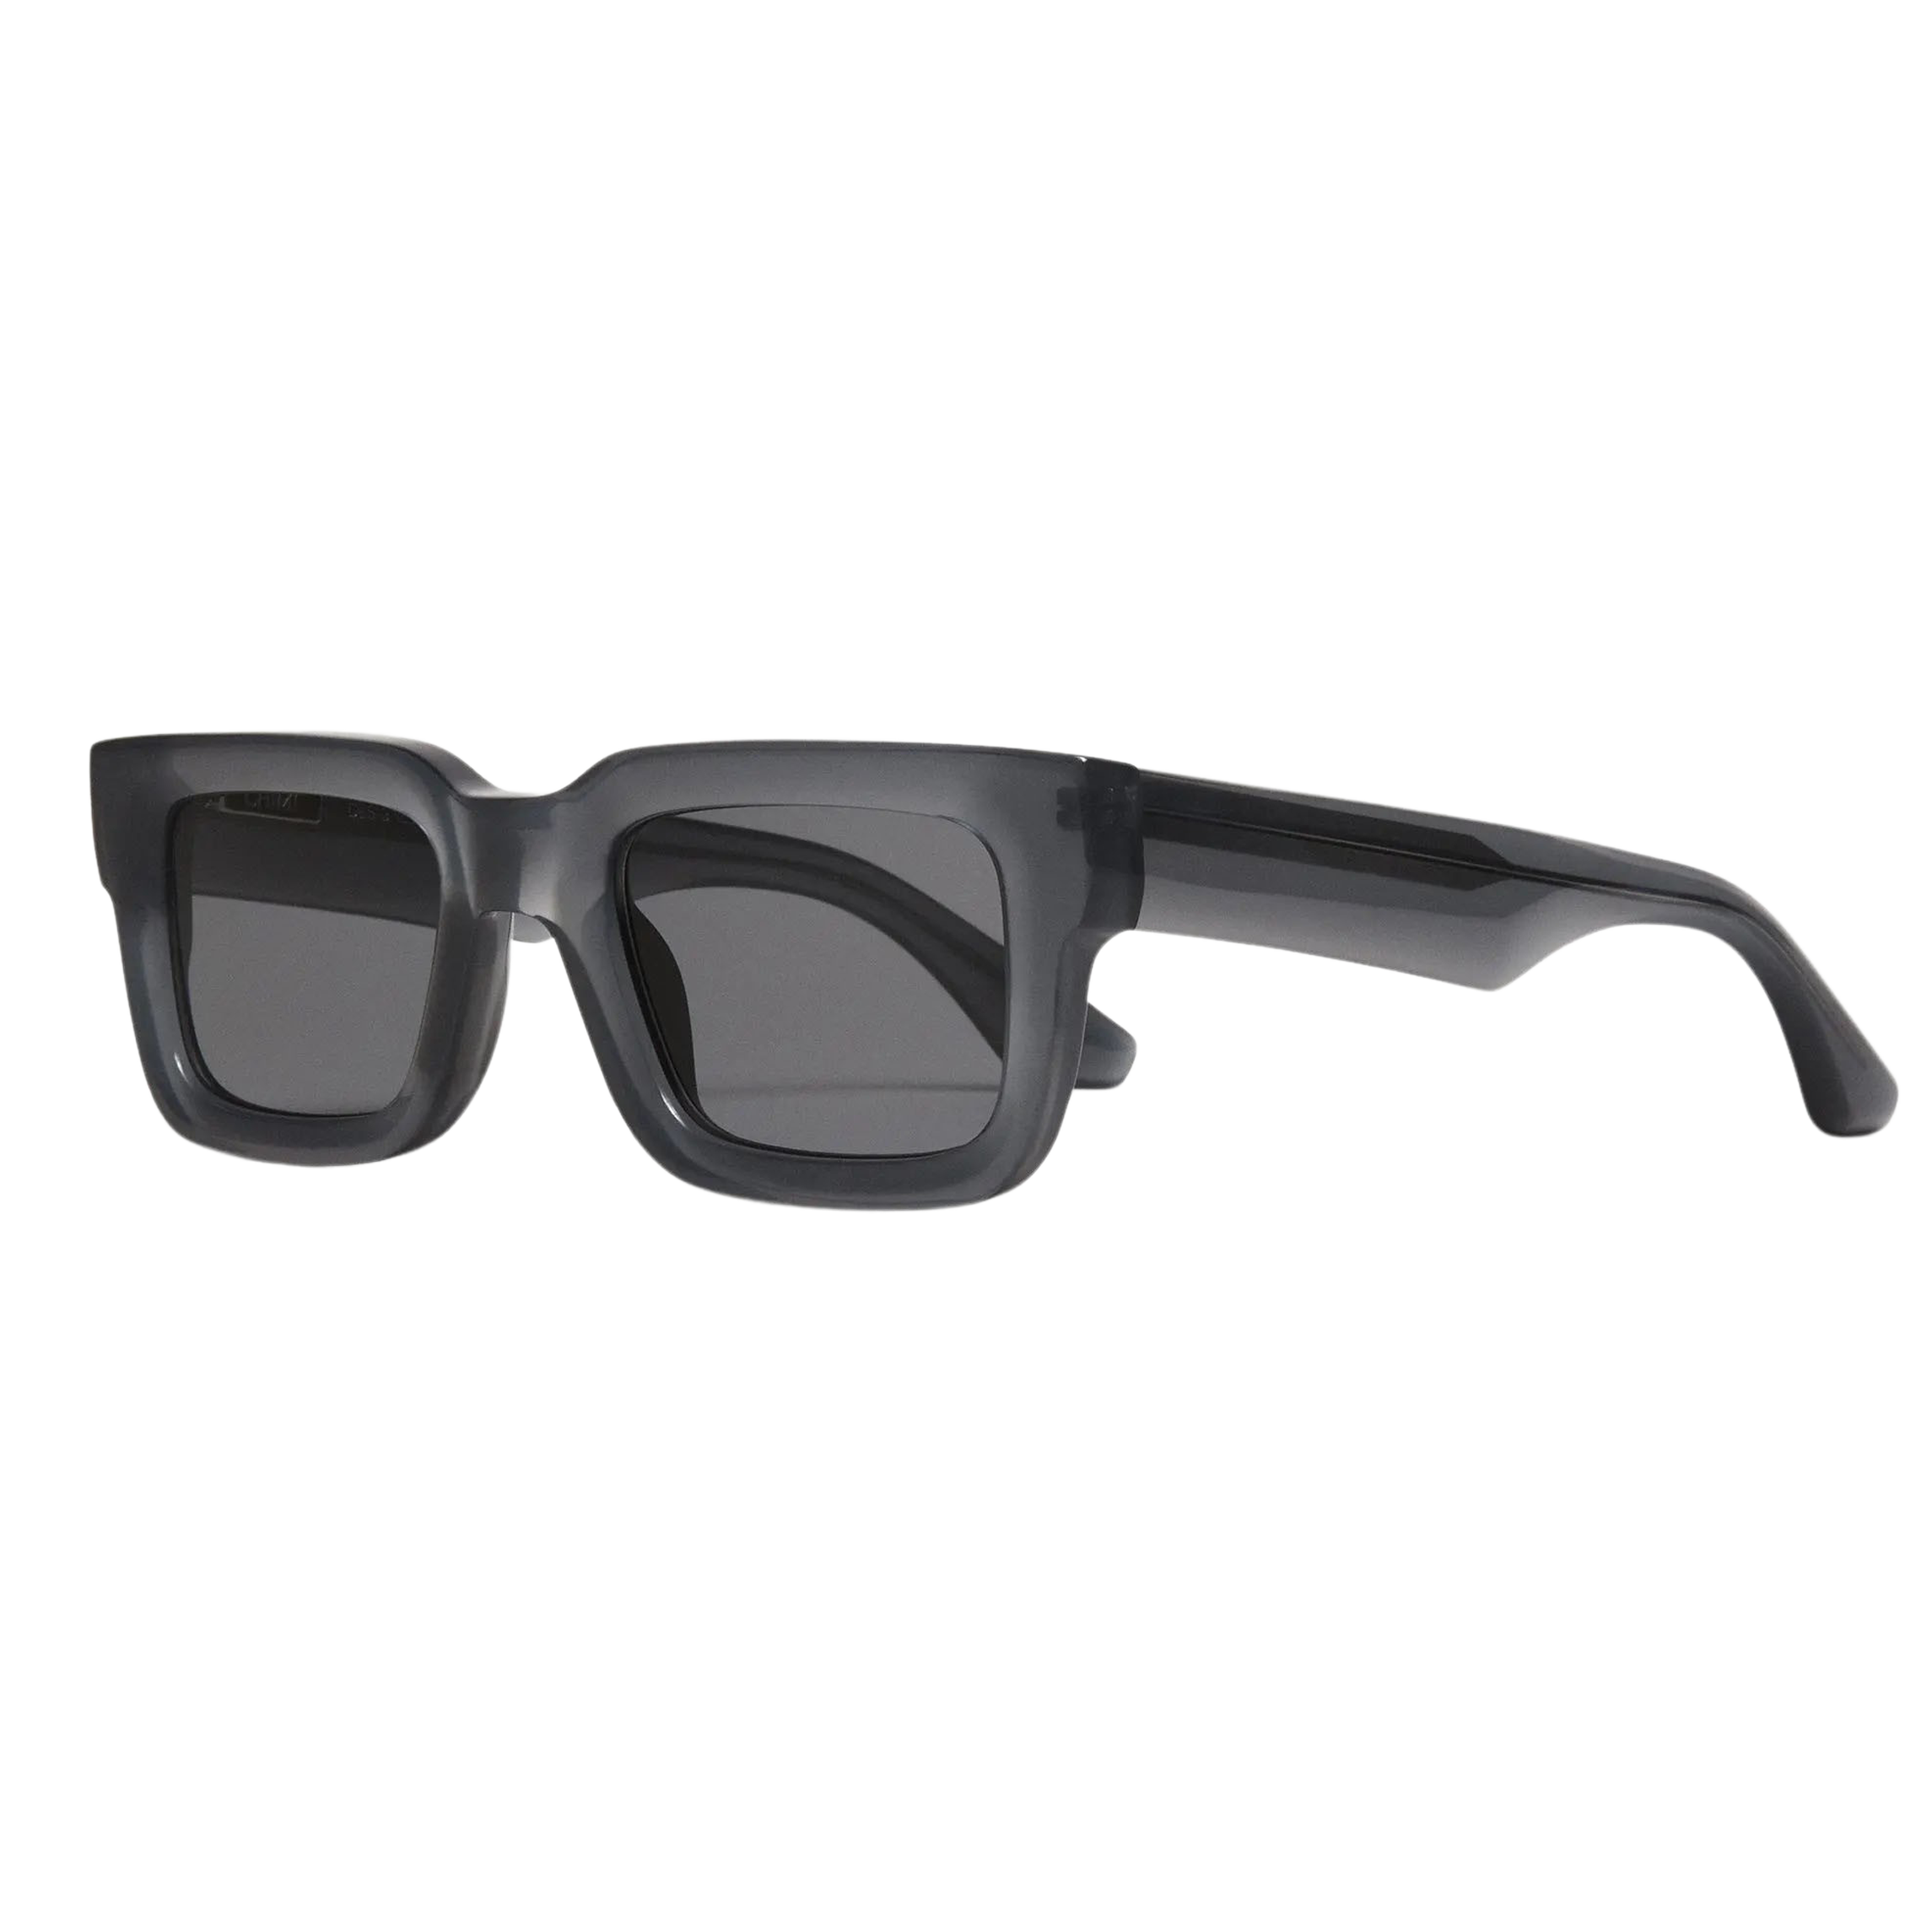 Model 05 Dark Grey Gradient Lenses Sunglasses 48mm by Chimi on a white background.